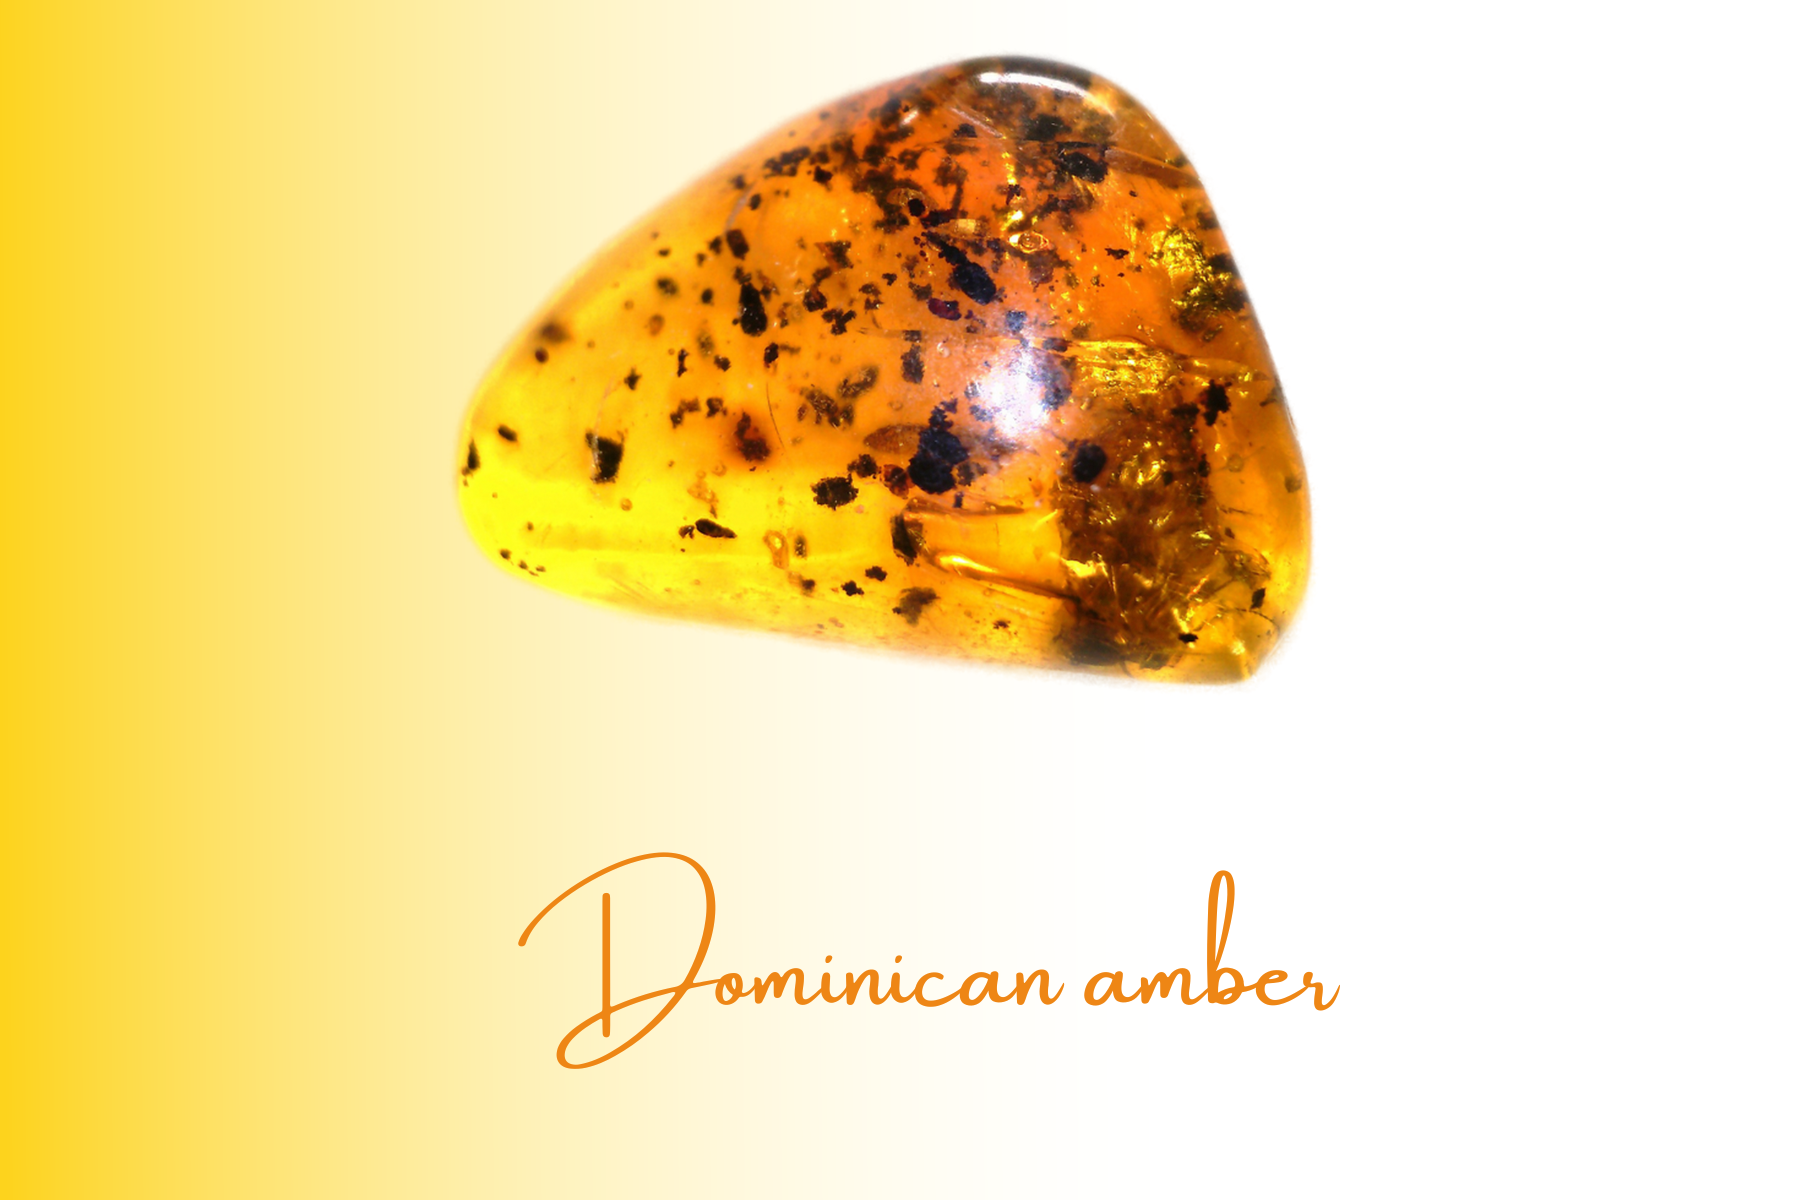 Inside is a triangular yellow Dominican amber with a lot of insects and small objects